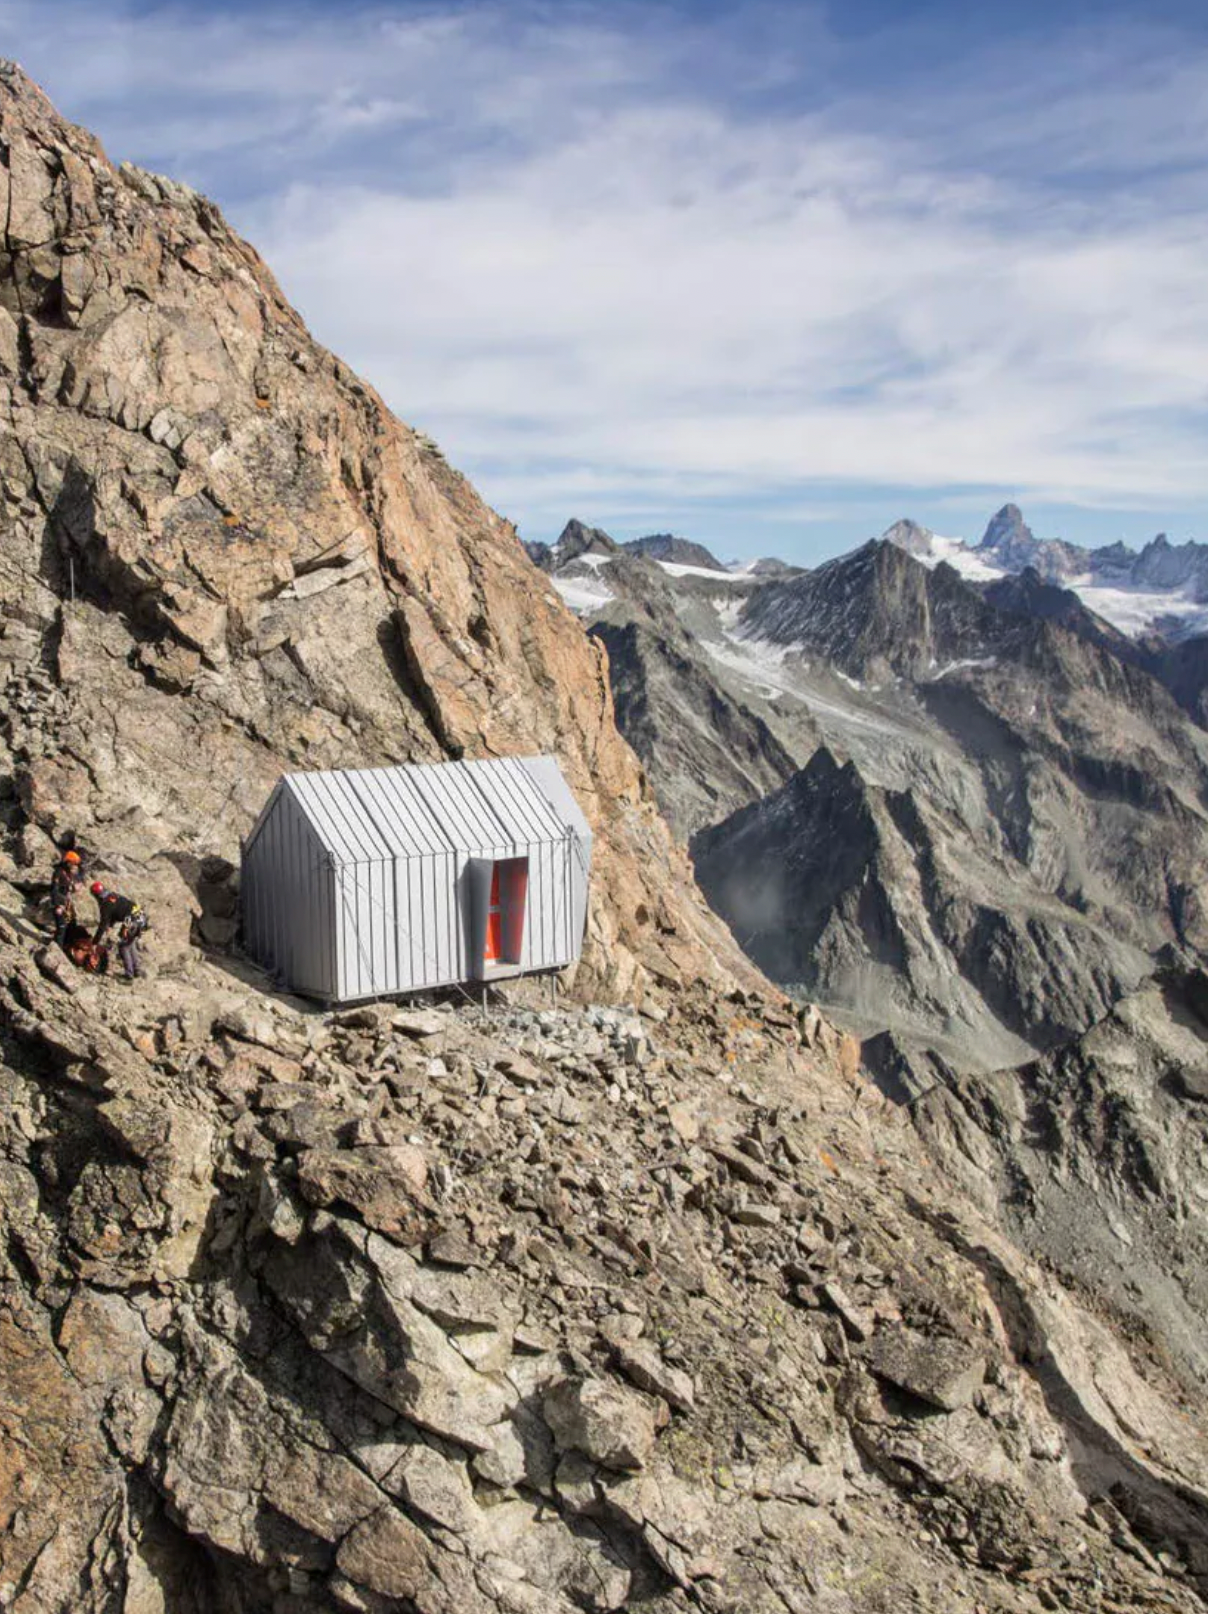 Amazing Mountain Cabins — Architecture Worth the Hike